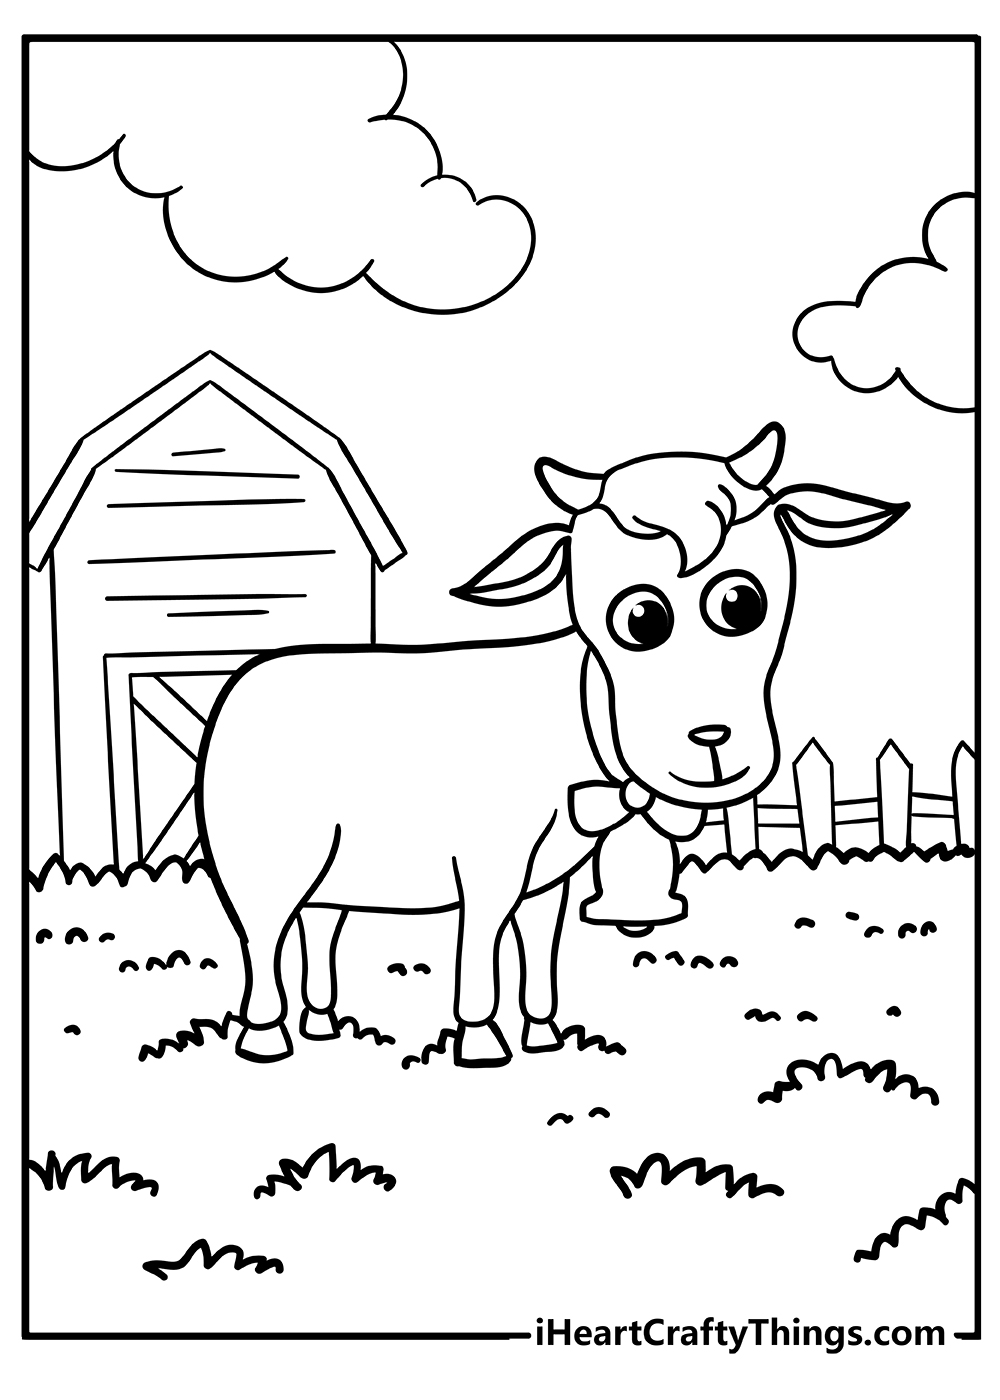 Farm animal coloring pages free printables